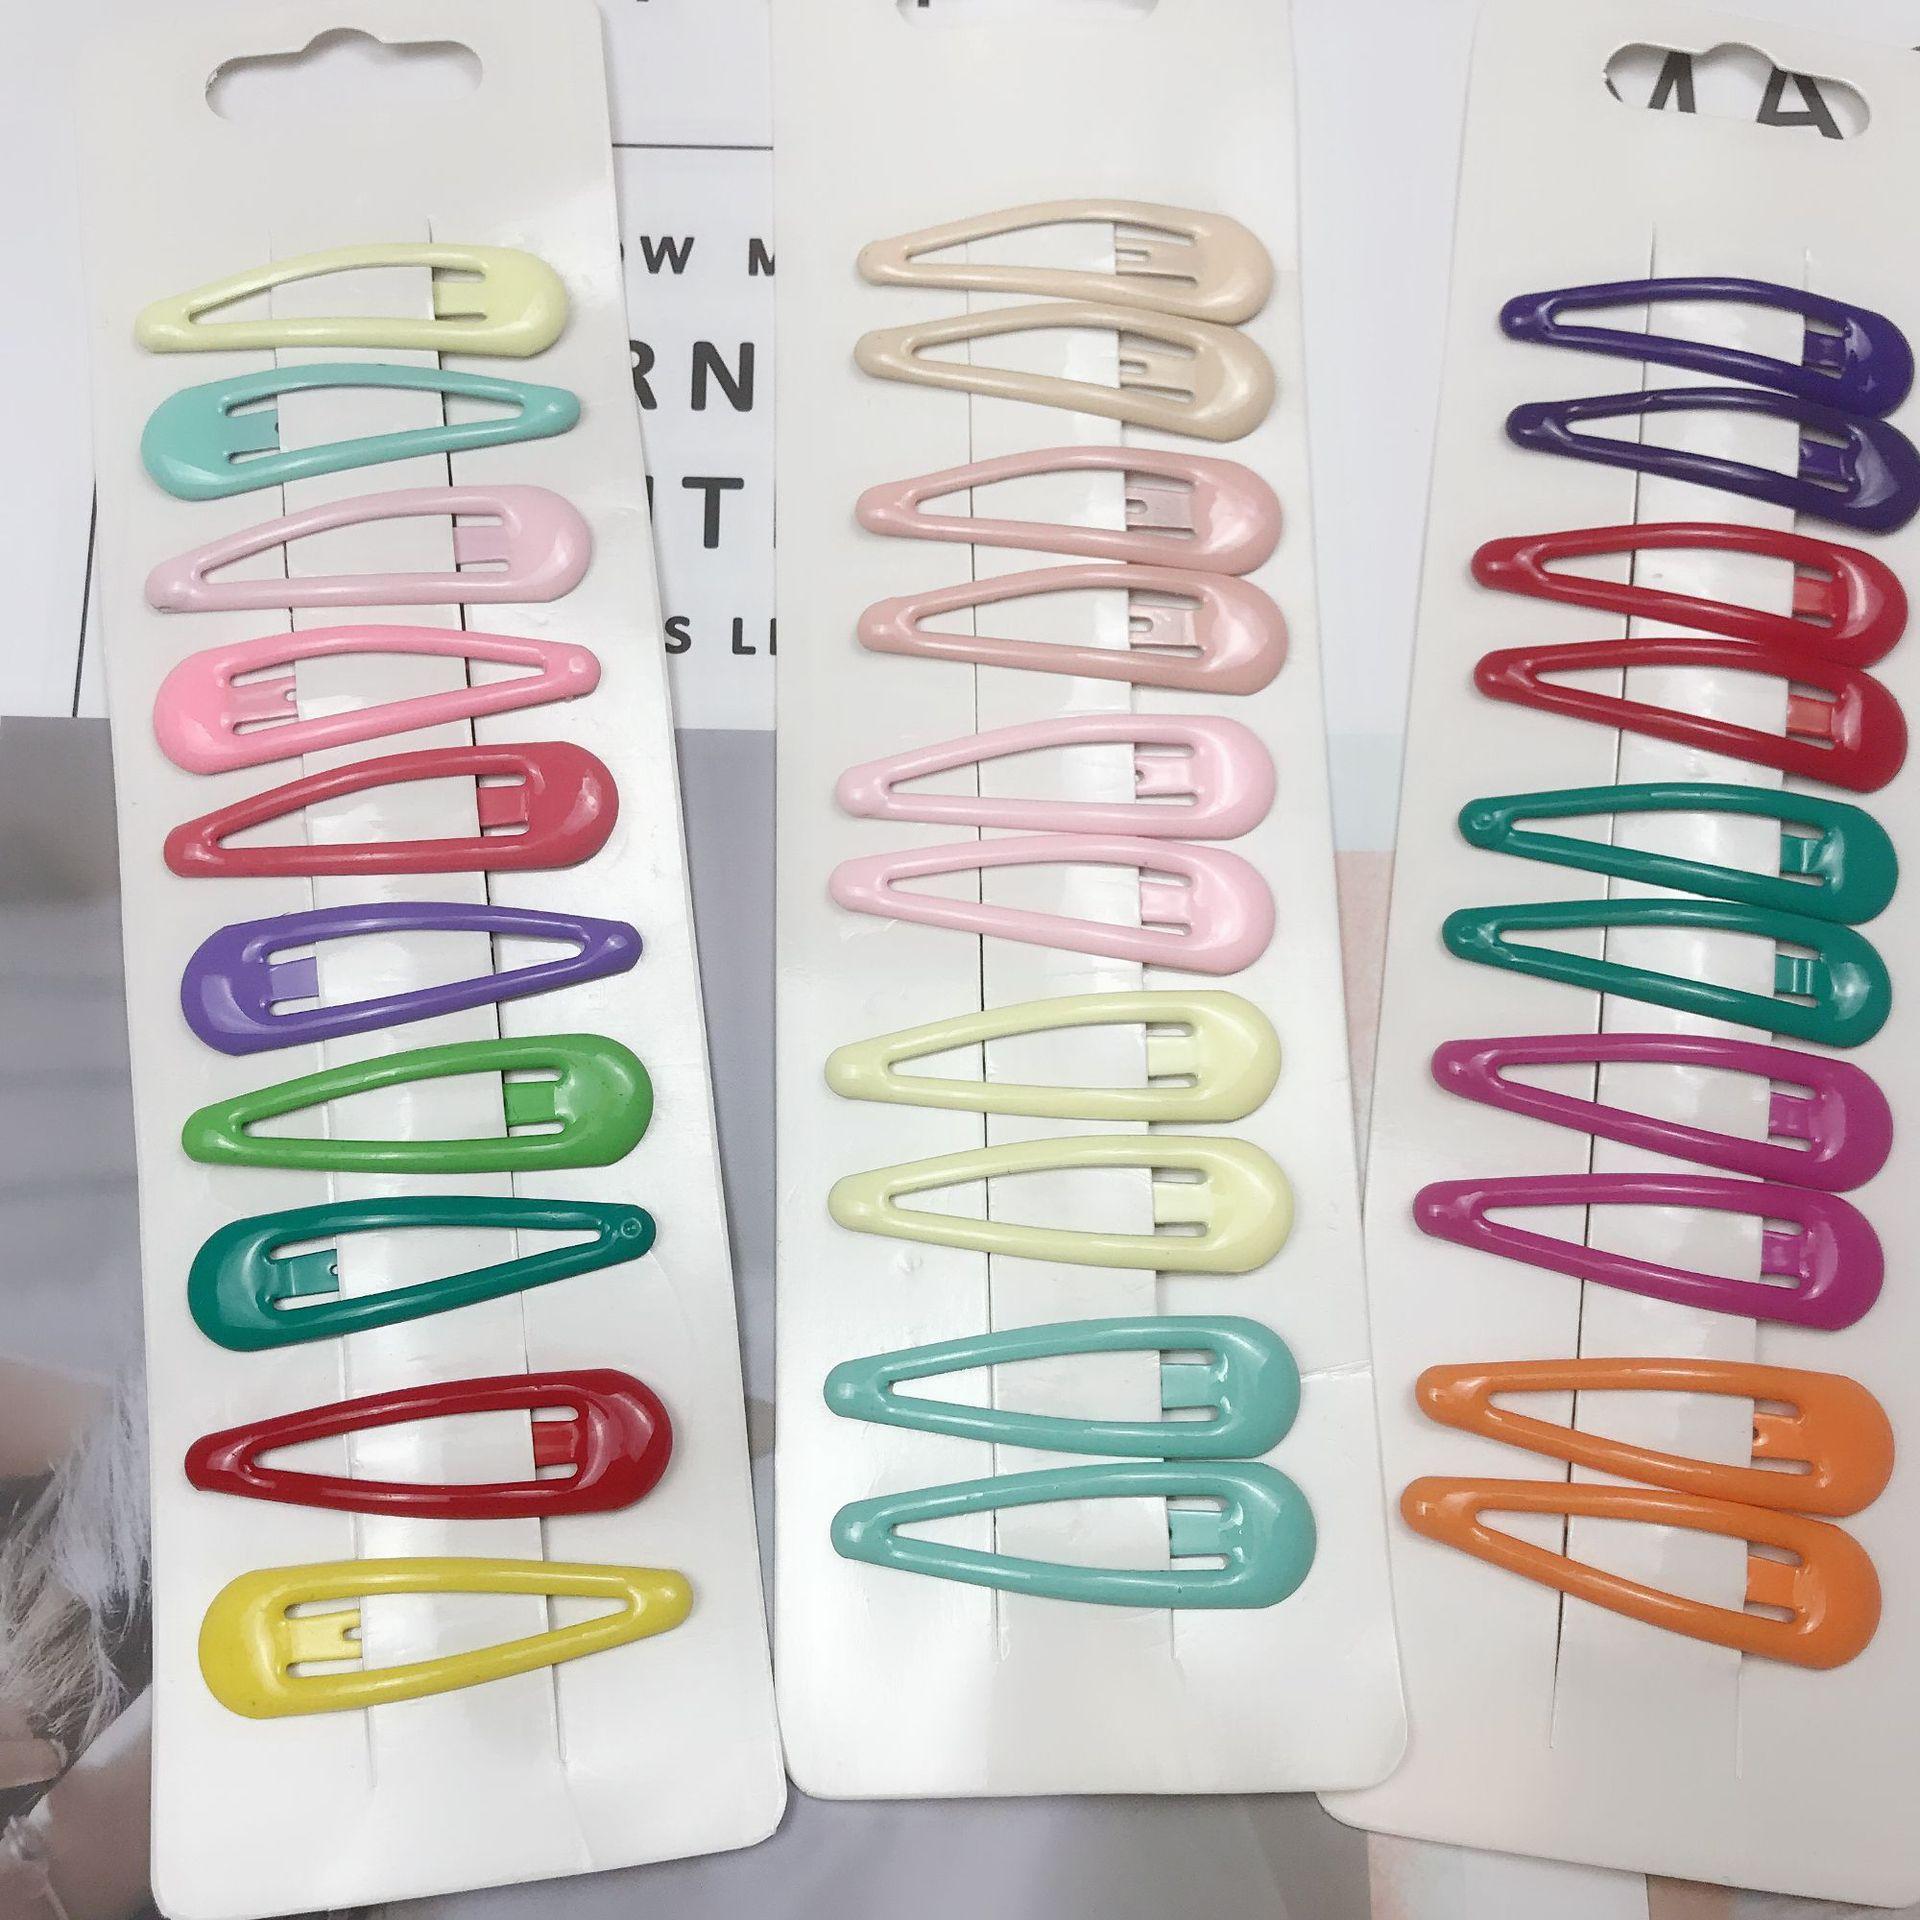 Изображение товара: 10Pcs/Set New BB Clips Cartoon Type Metal Candy Color Girls Hairpins Hair Clip Kids Headwear Children Styling Accessories Baby